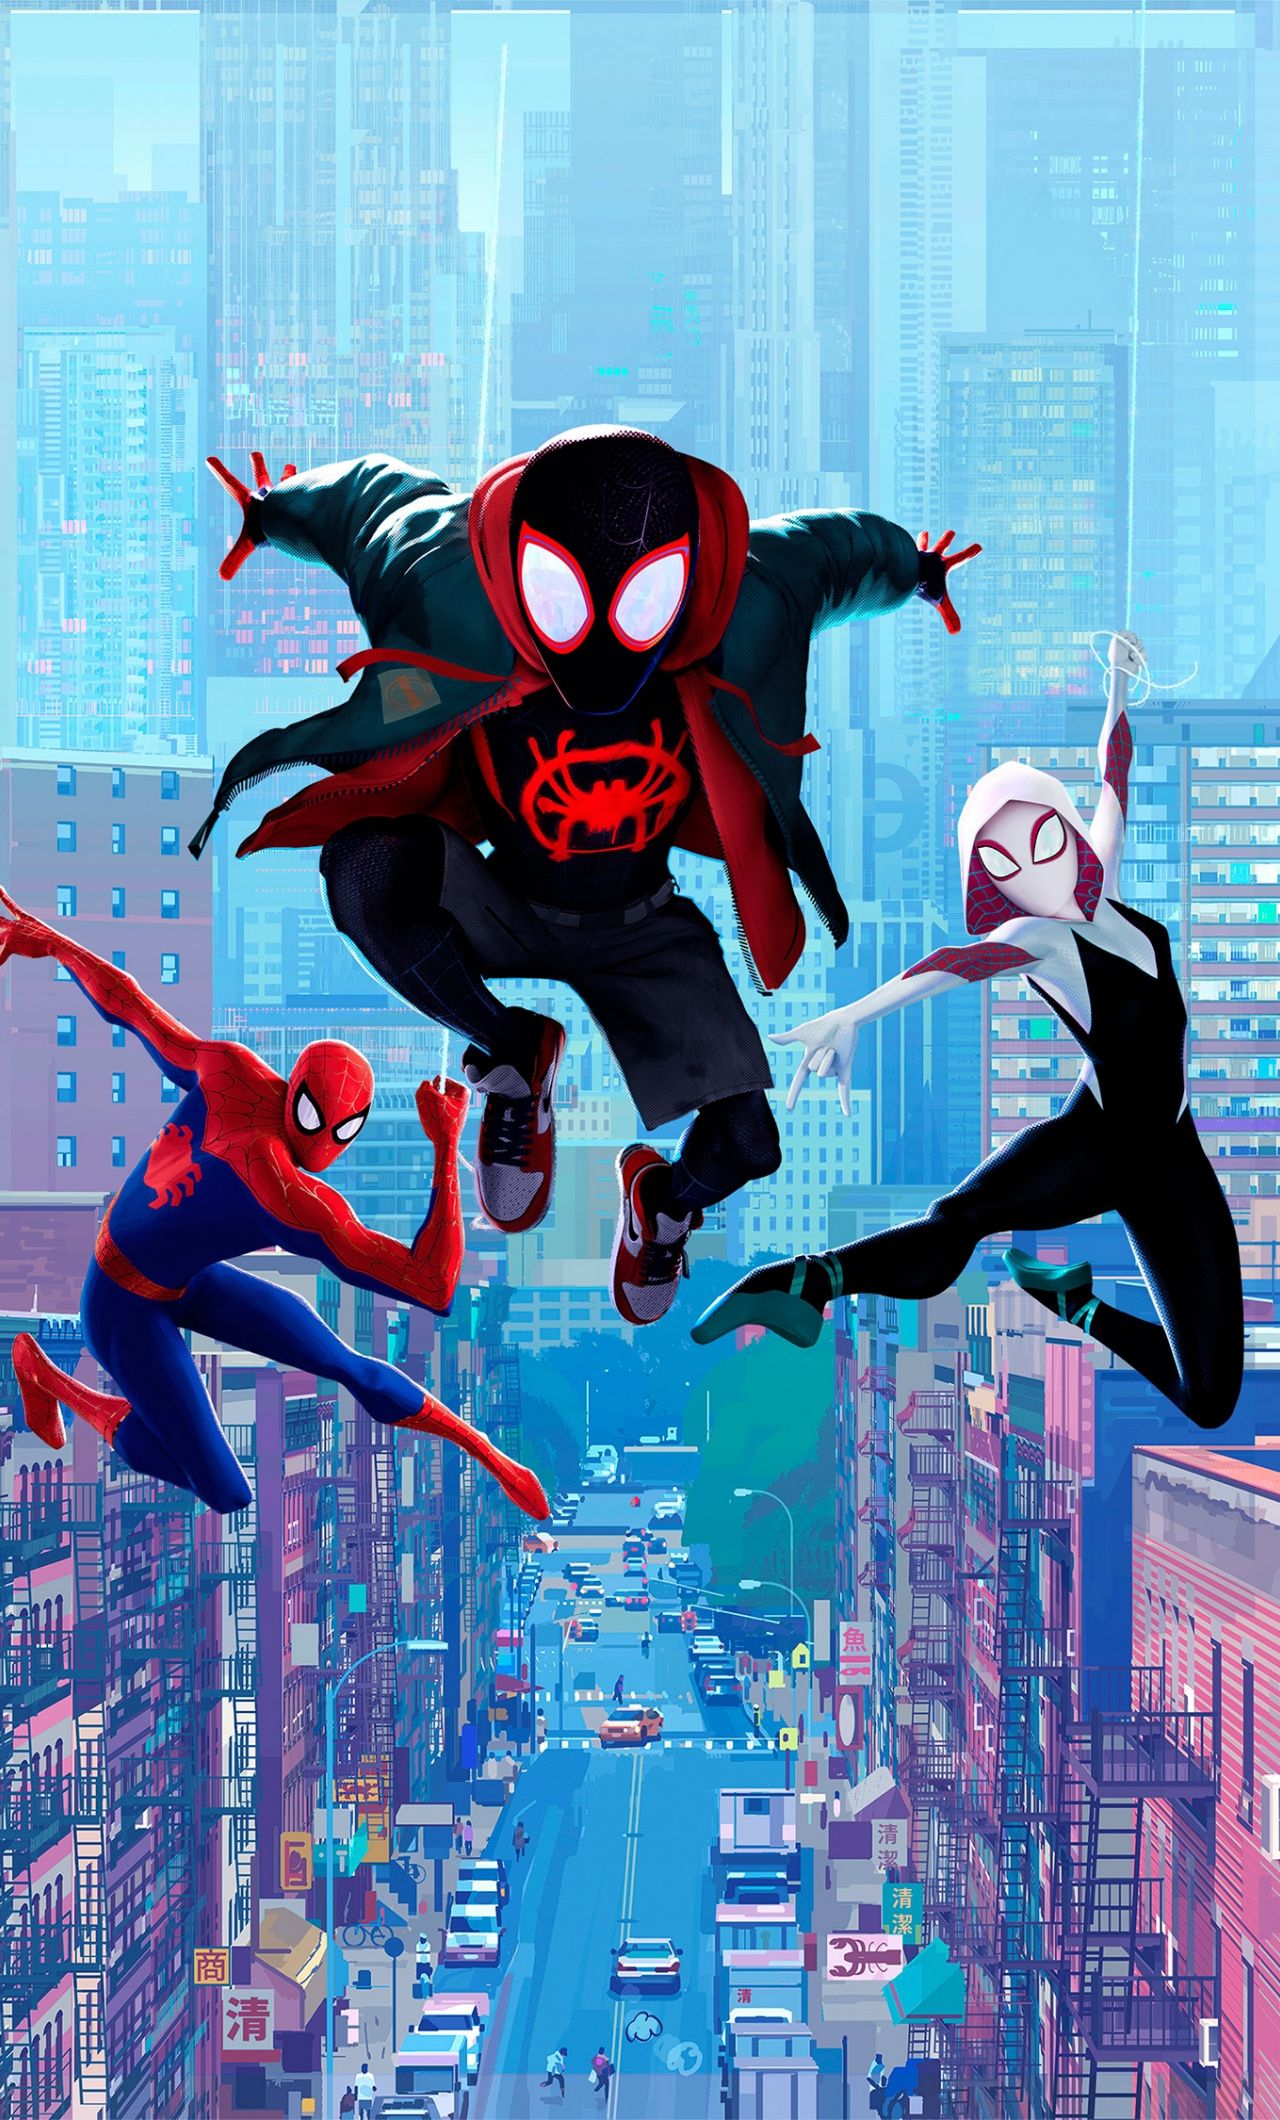 Spiderman wallpapers for iPhone and Android